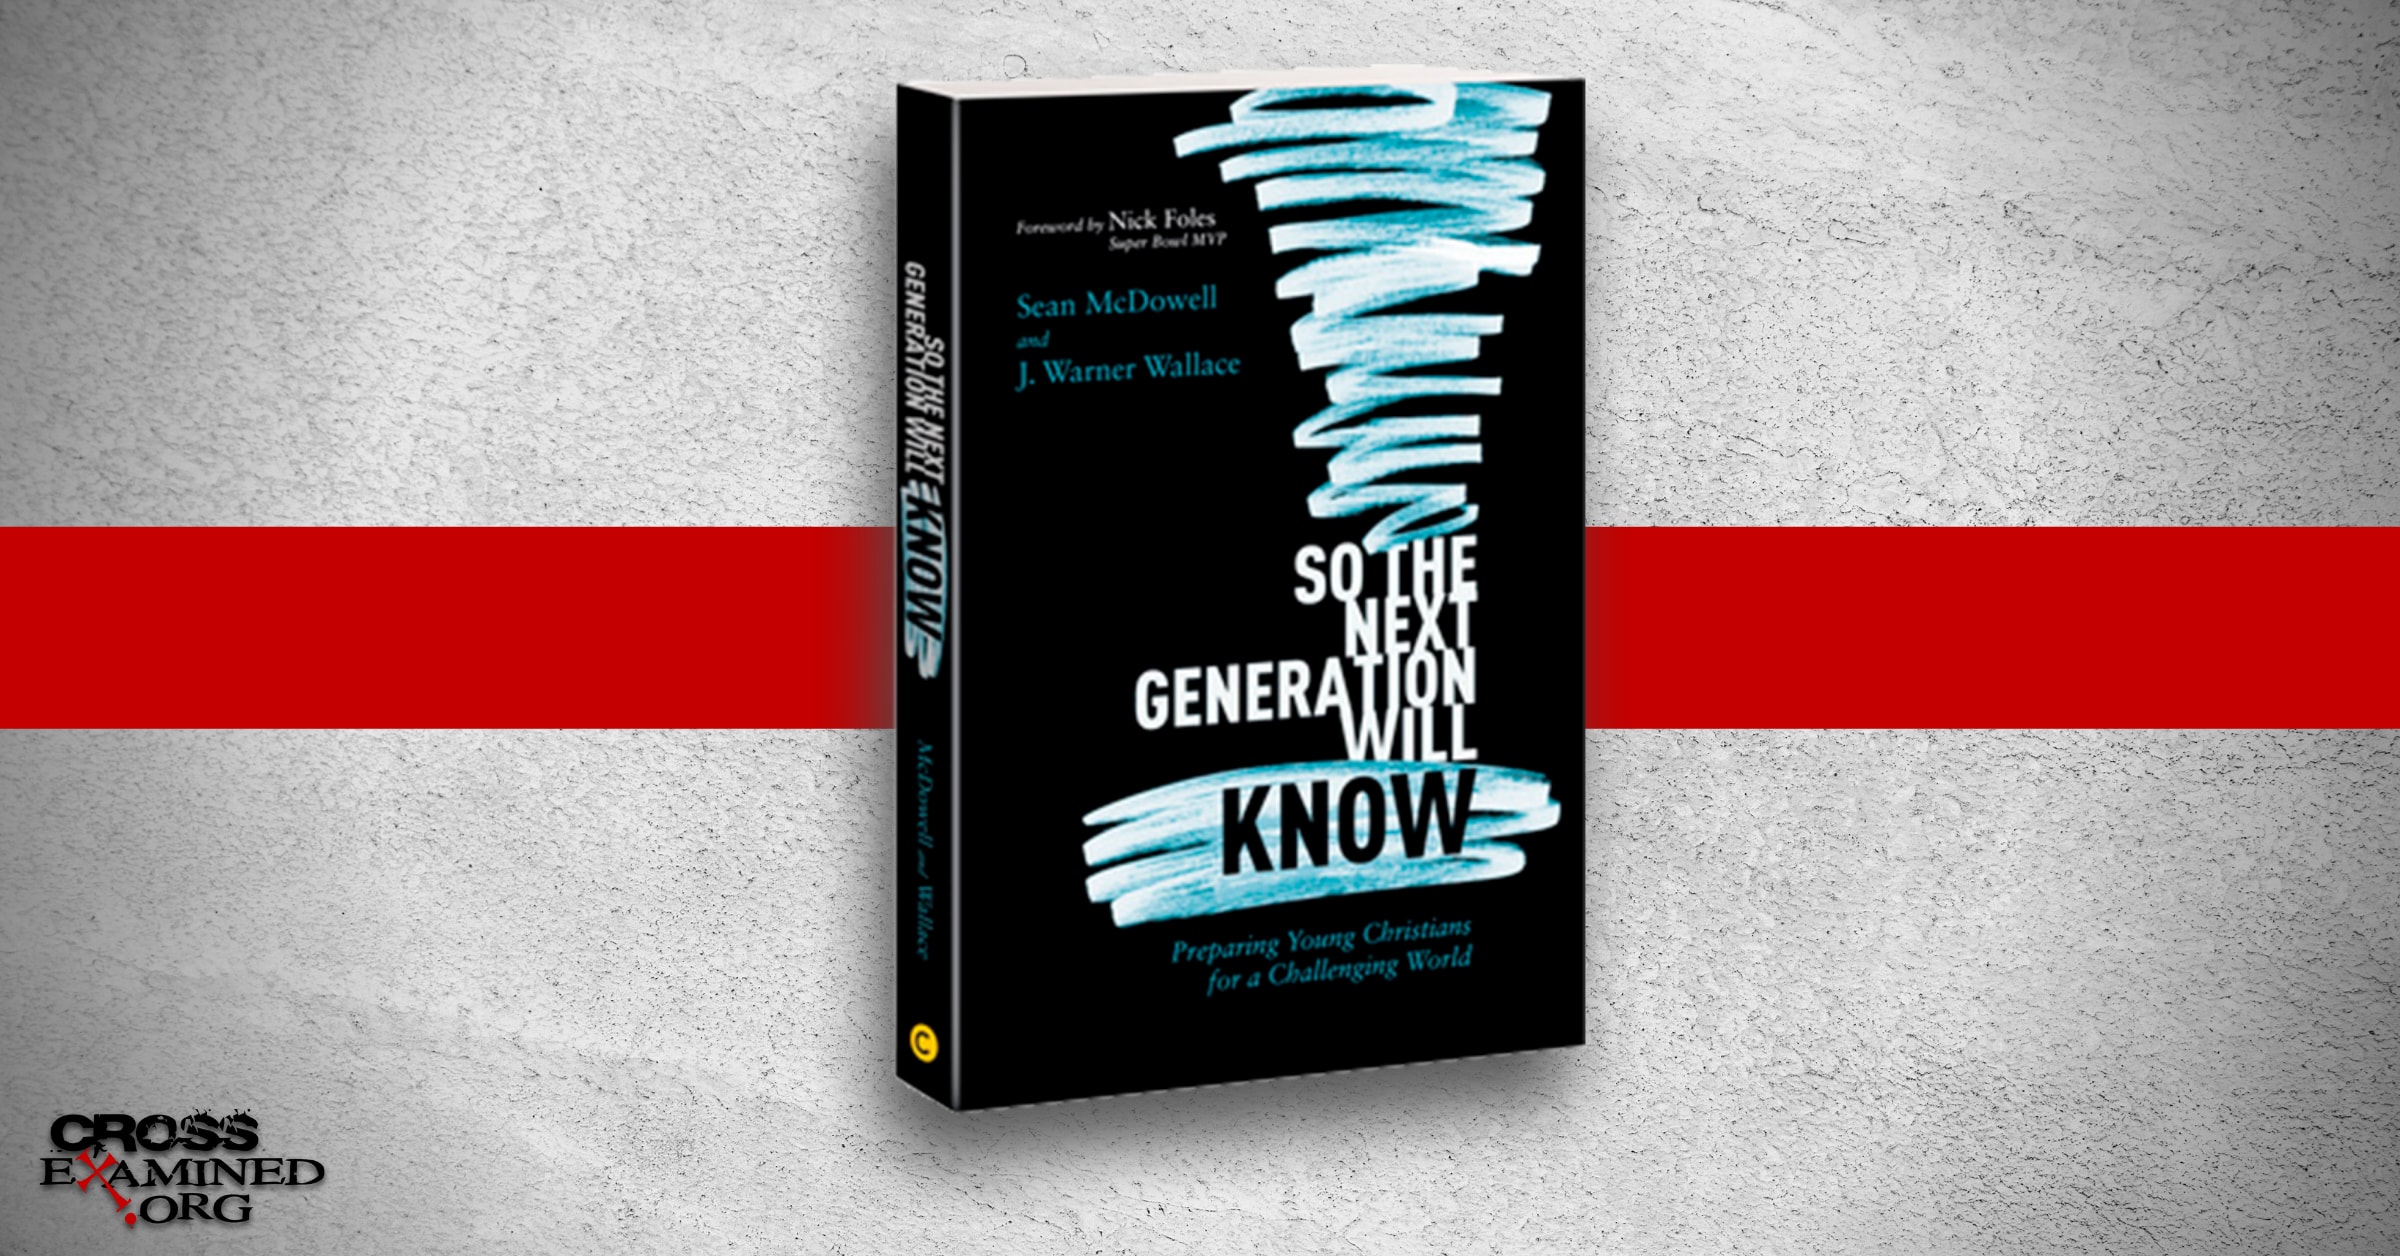 Book Review: So the Next Generation Will Know by Sean McDowell and J. Warner Wallace